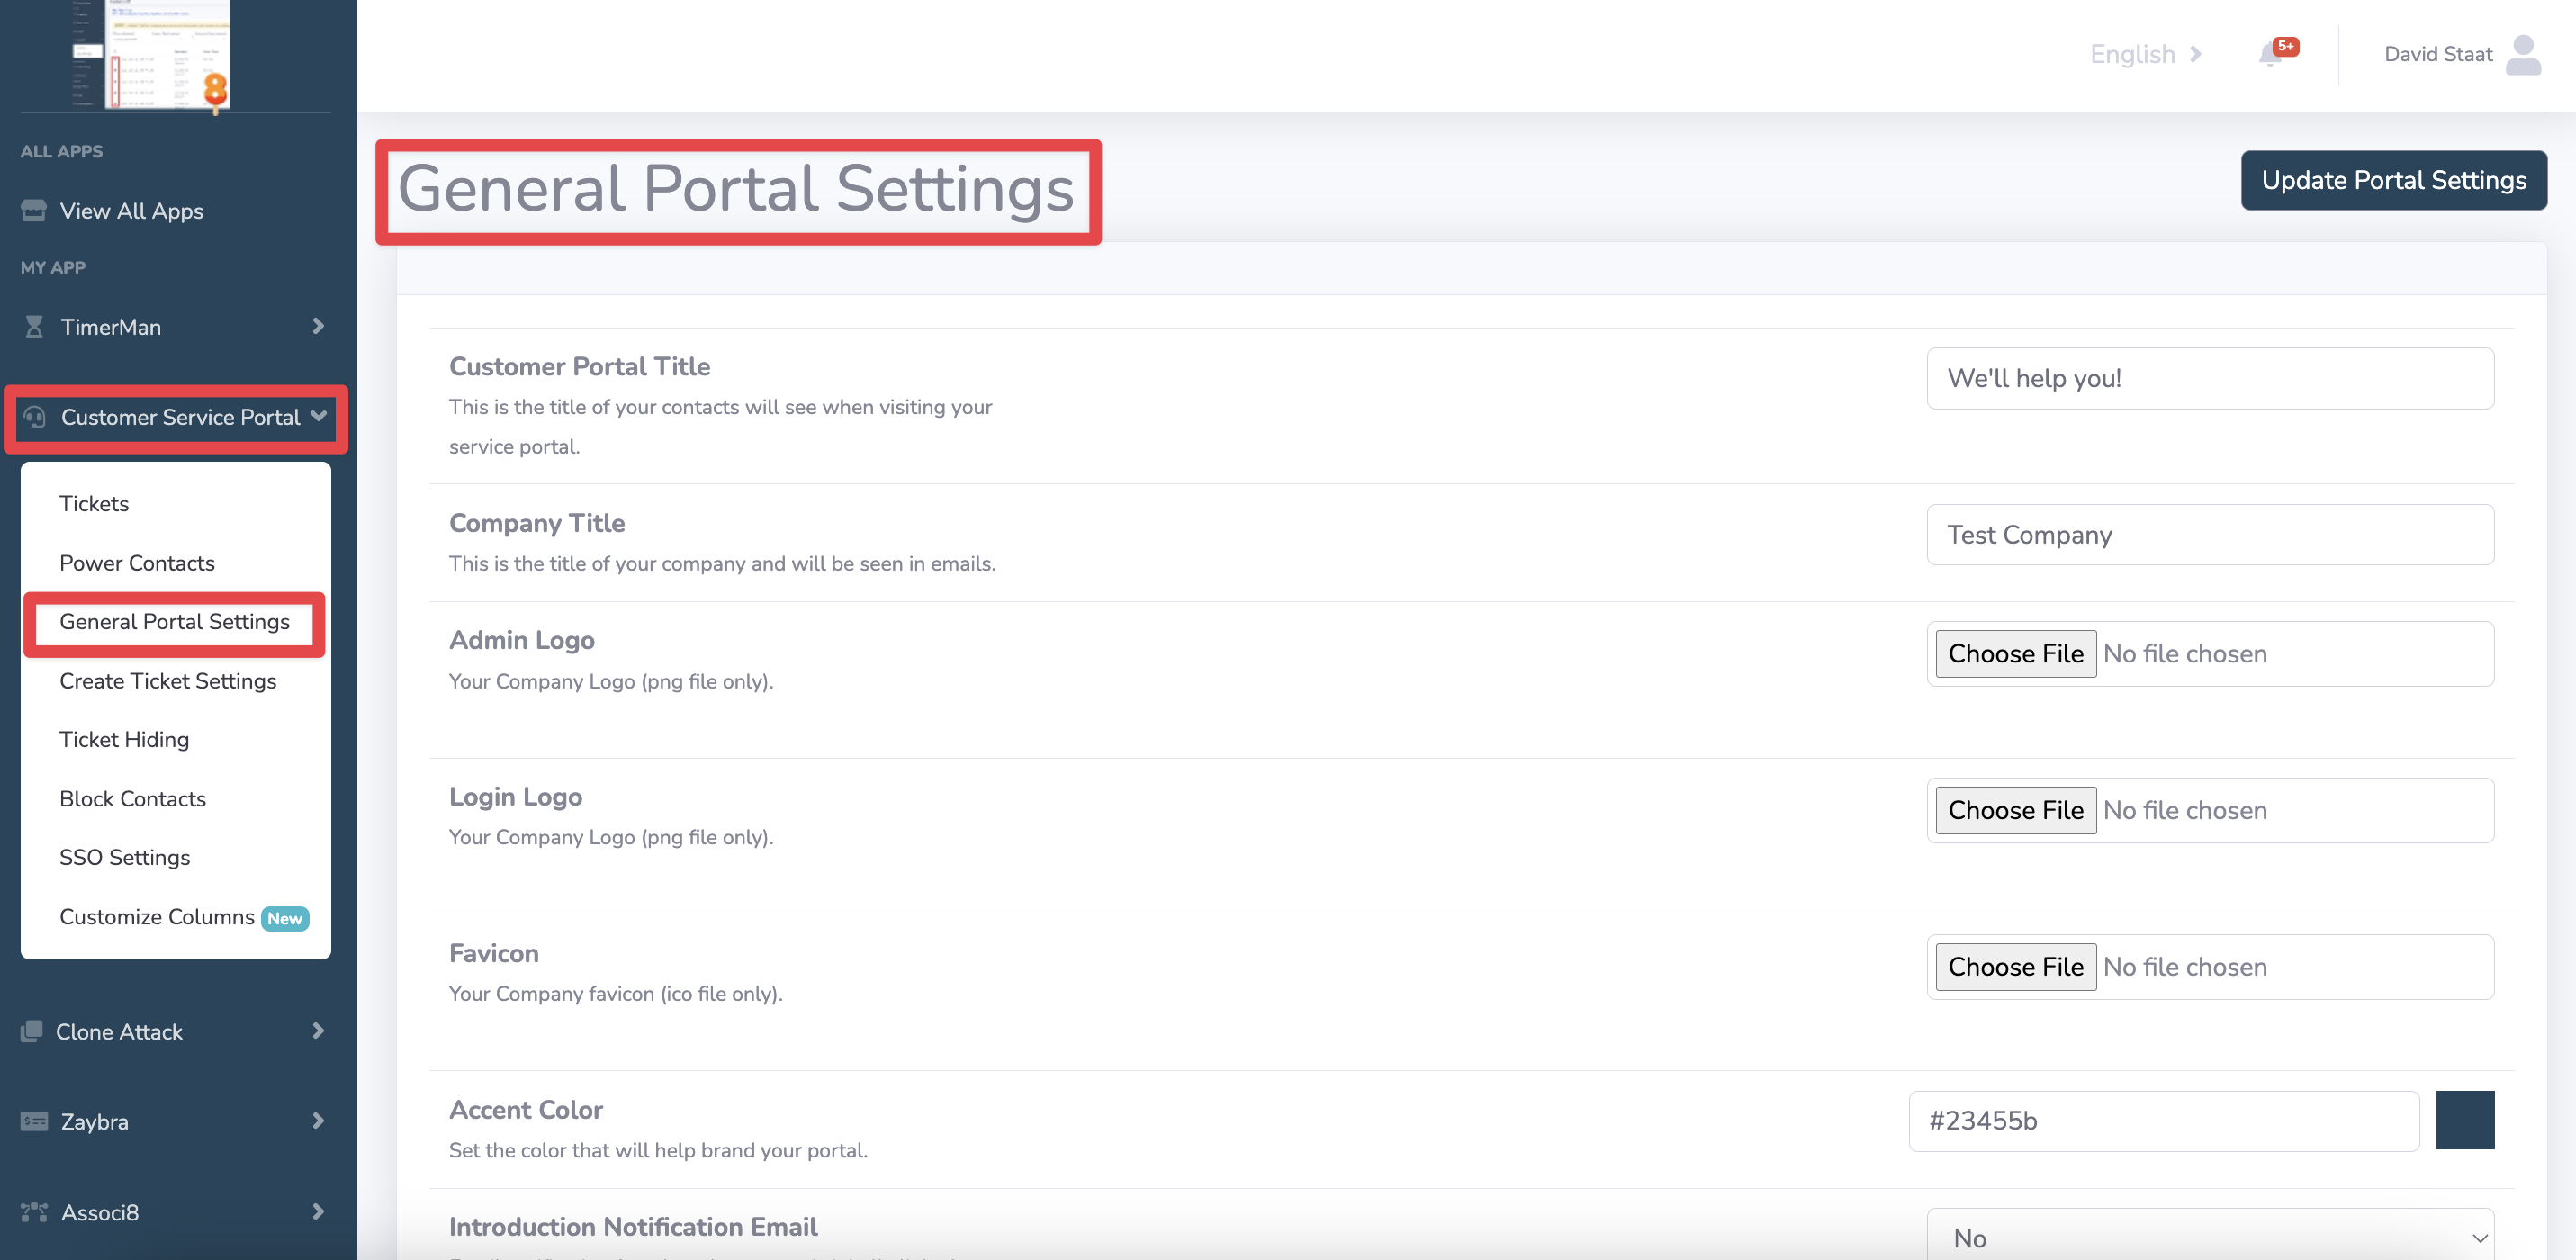 How to access customer portal settings in the hapily admin portal